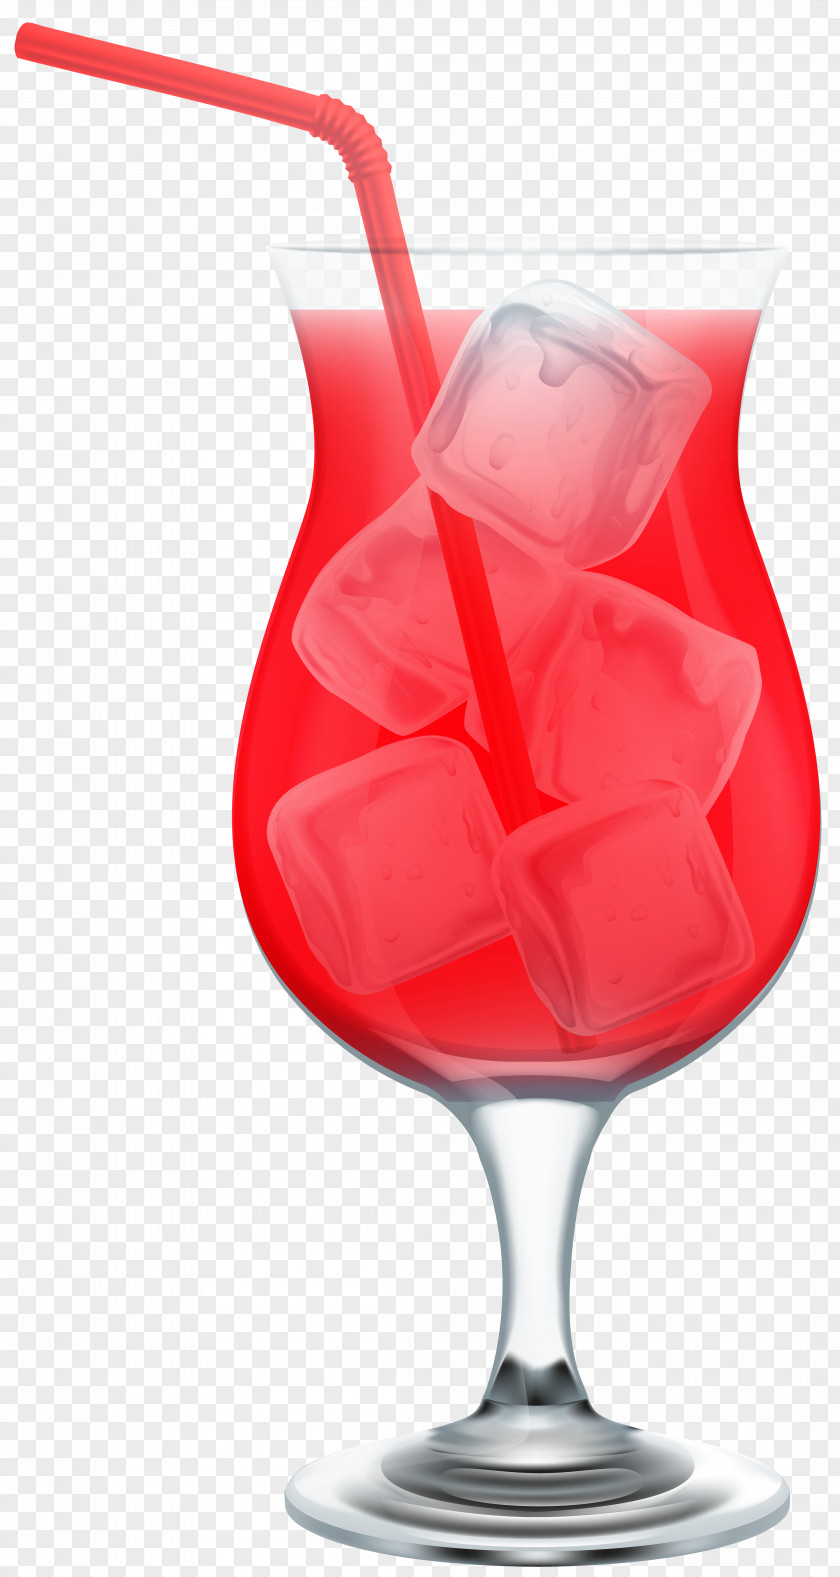 Red Juice Cocktail Clip Art Image Martini Russian Blue Lagoon PNG